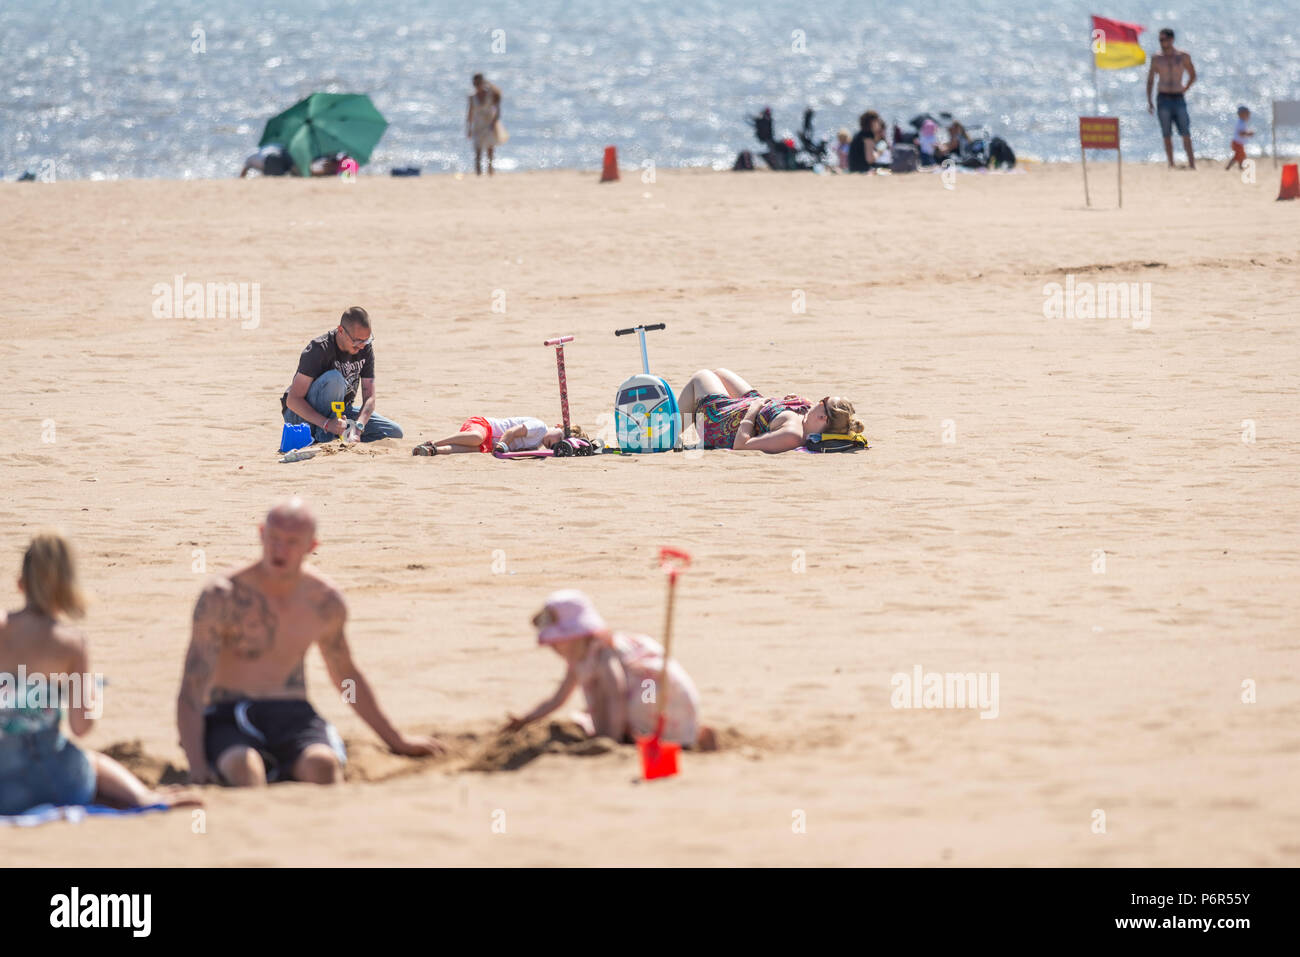 Skegness, UK, 2nd July 2018. Parents and children playing and sunbathing on the beach, enjoying the hot weather during a continued heatwave. Credit: Steven Booth/Alamy Live News Stock Photo